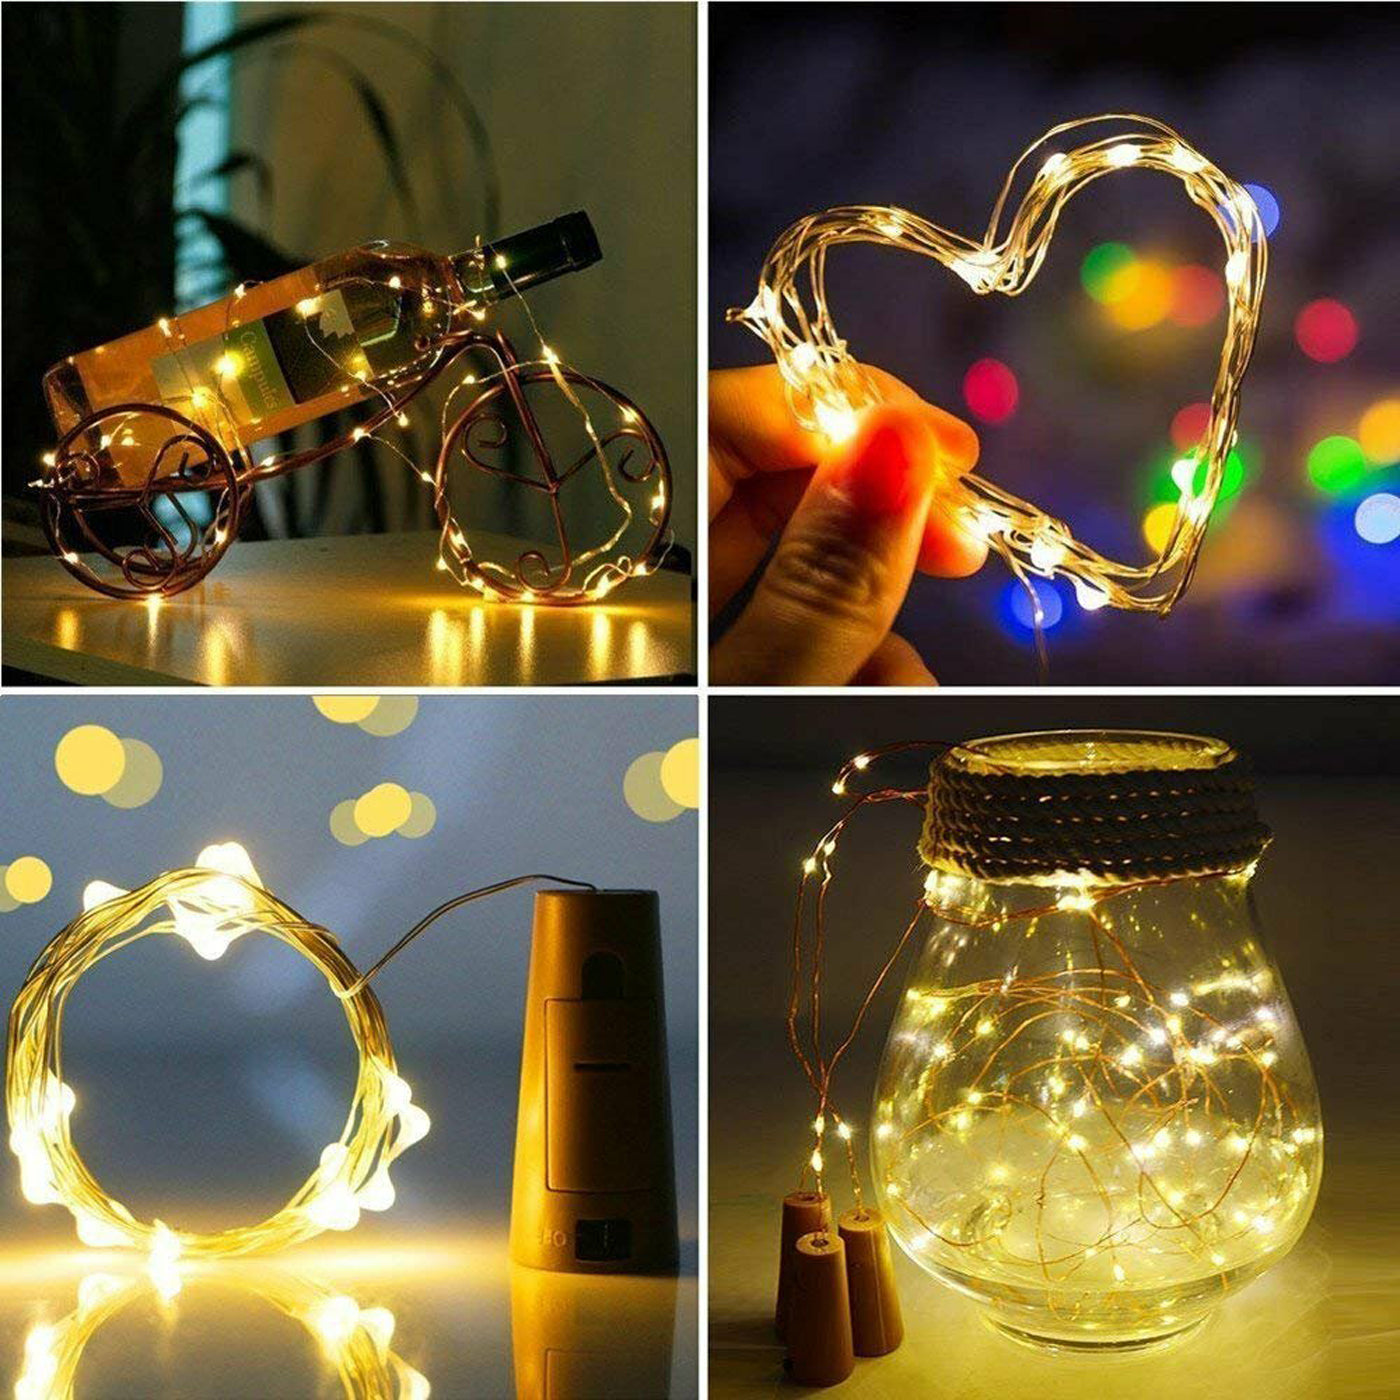 DecorTwist LED Copper String Cork Light for Home and Office Decor| Indoor & Outdoor Decorative Lights|Diwali |Wedding | Diwali | Wedding (Copper String Cork, 4)